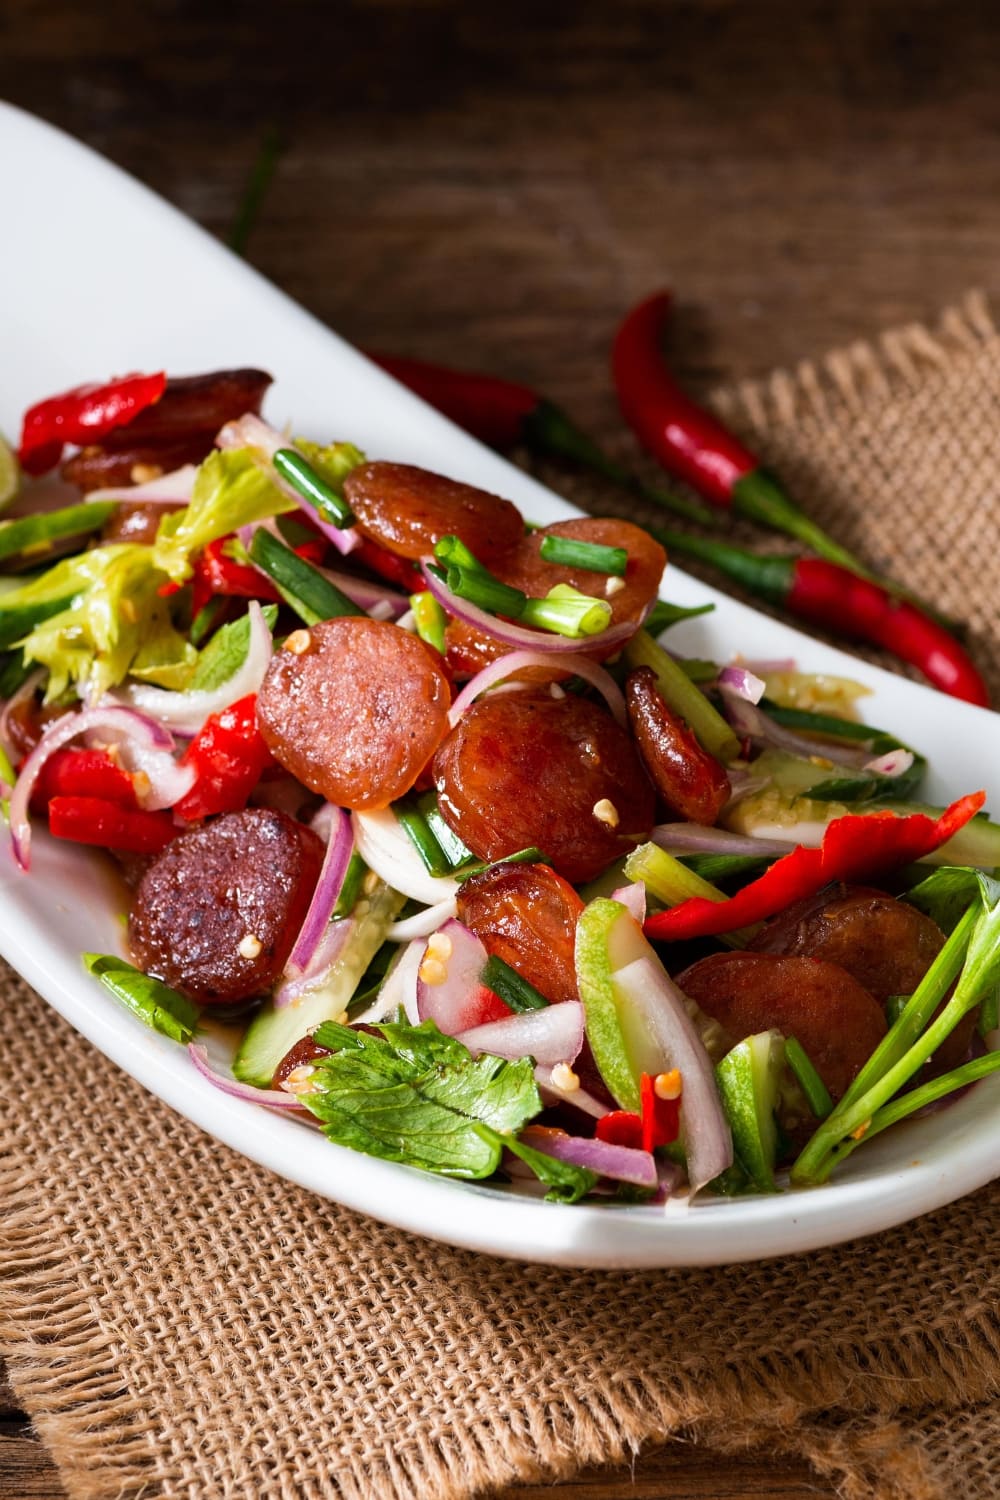 Spicy Chinese Pork Sausage and Vegetable Salad